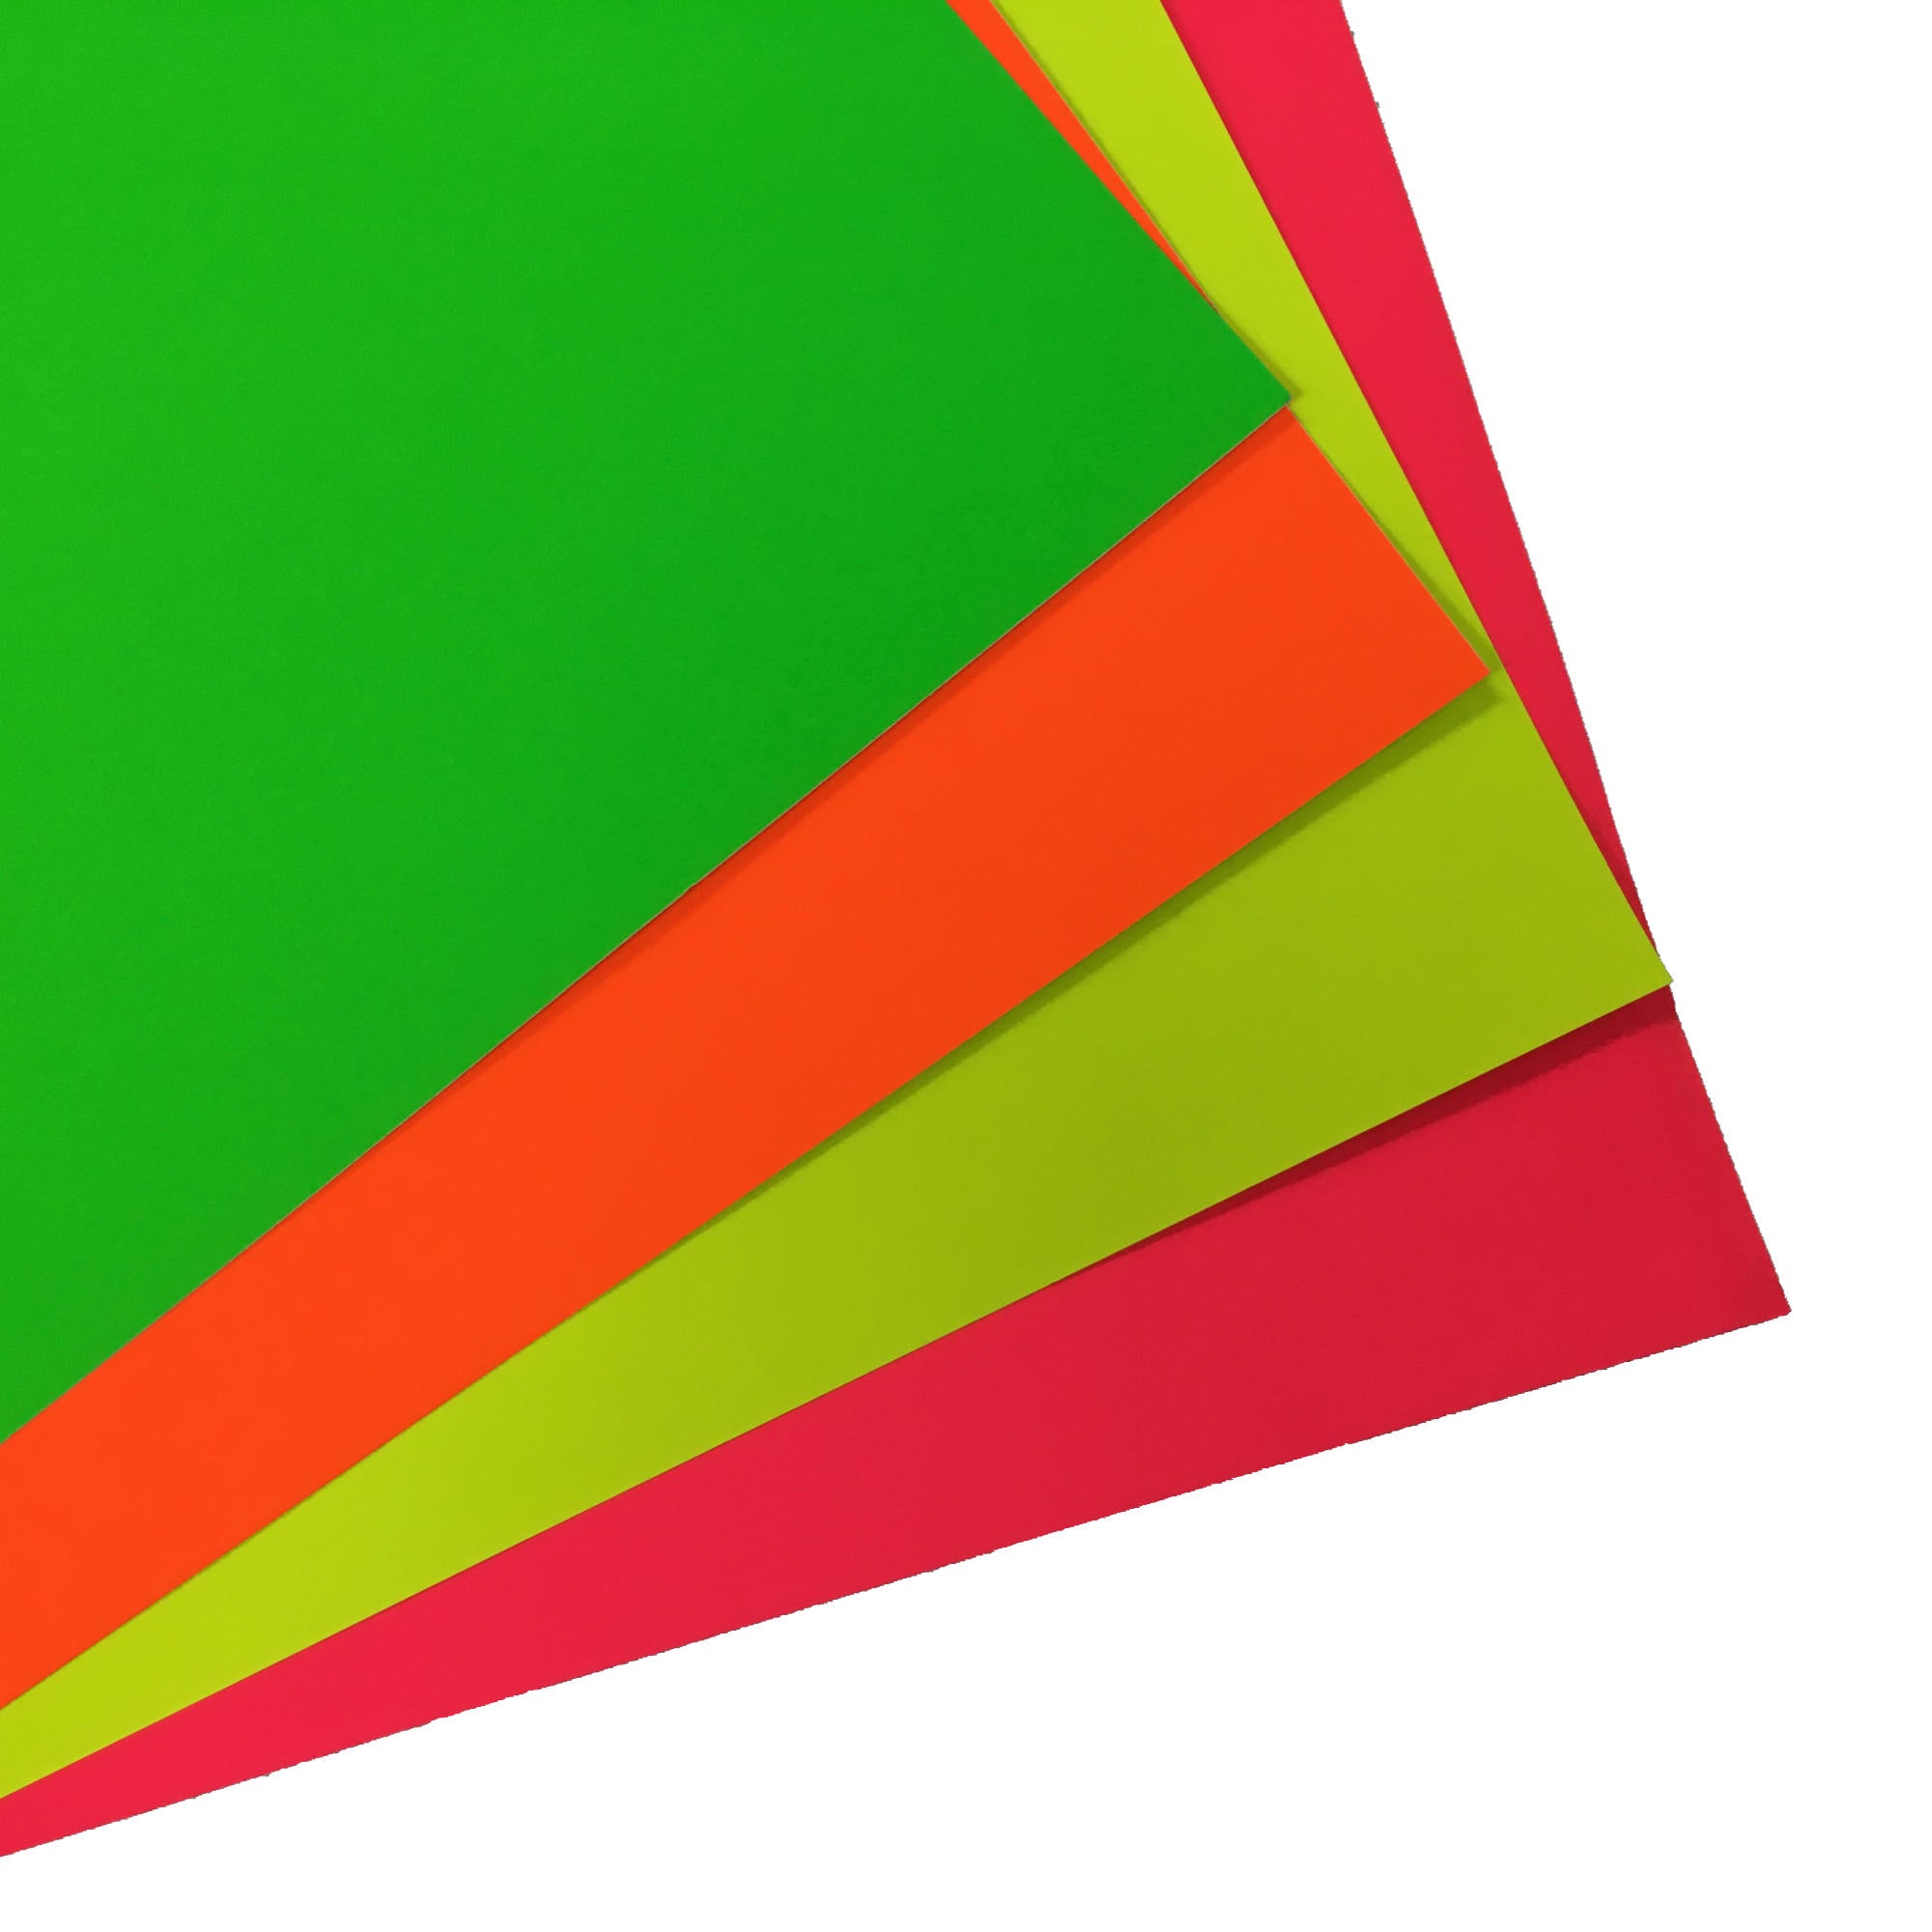 Buy DayGlo Neon Paper, Card